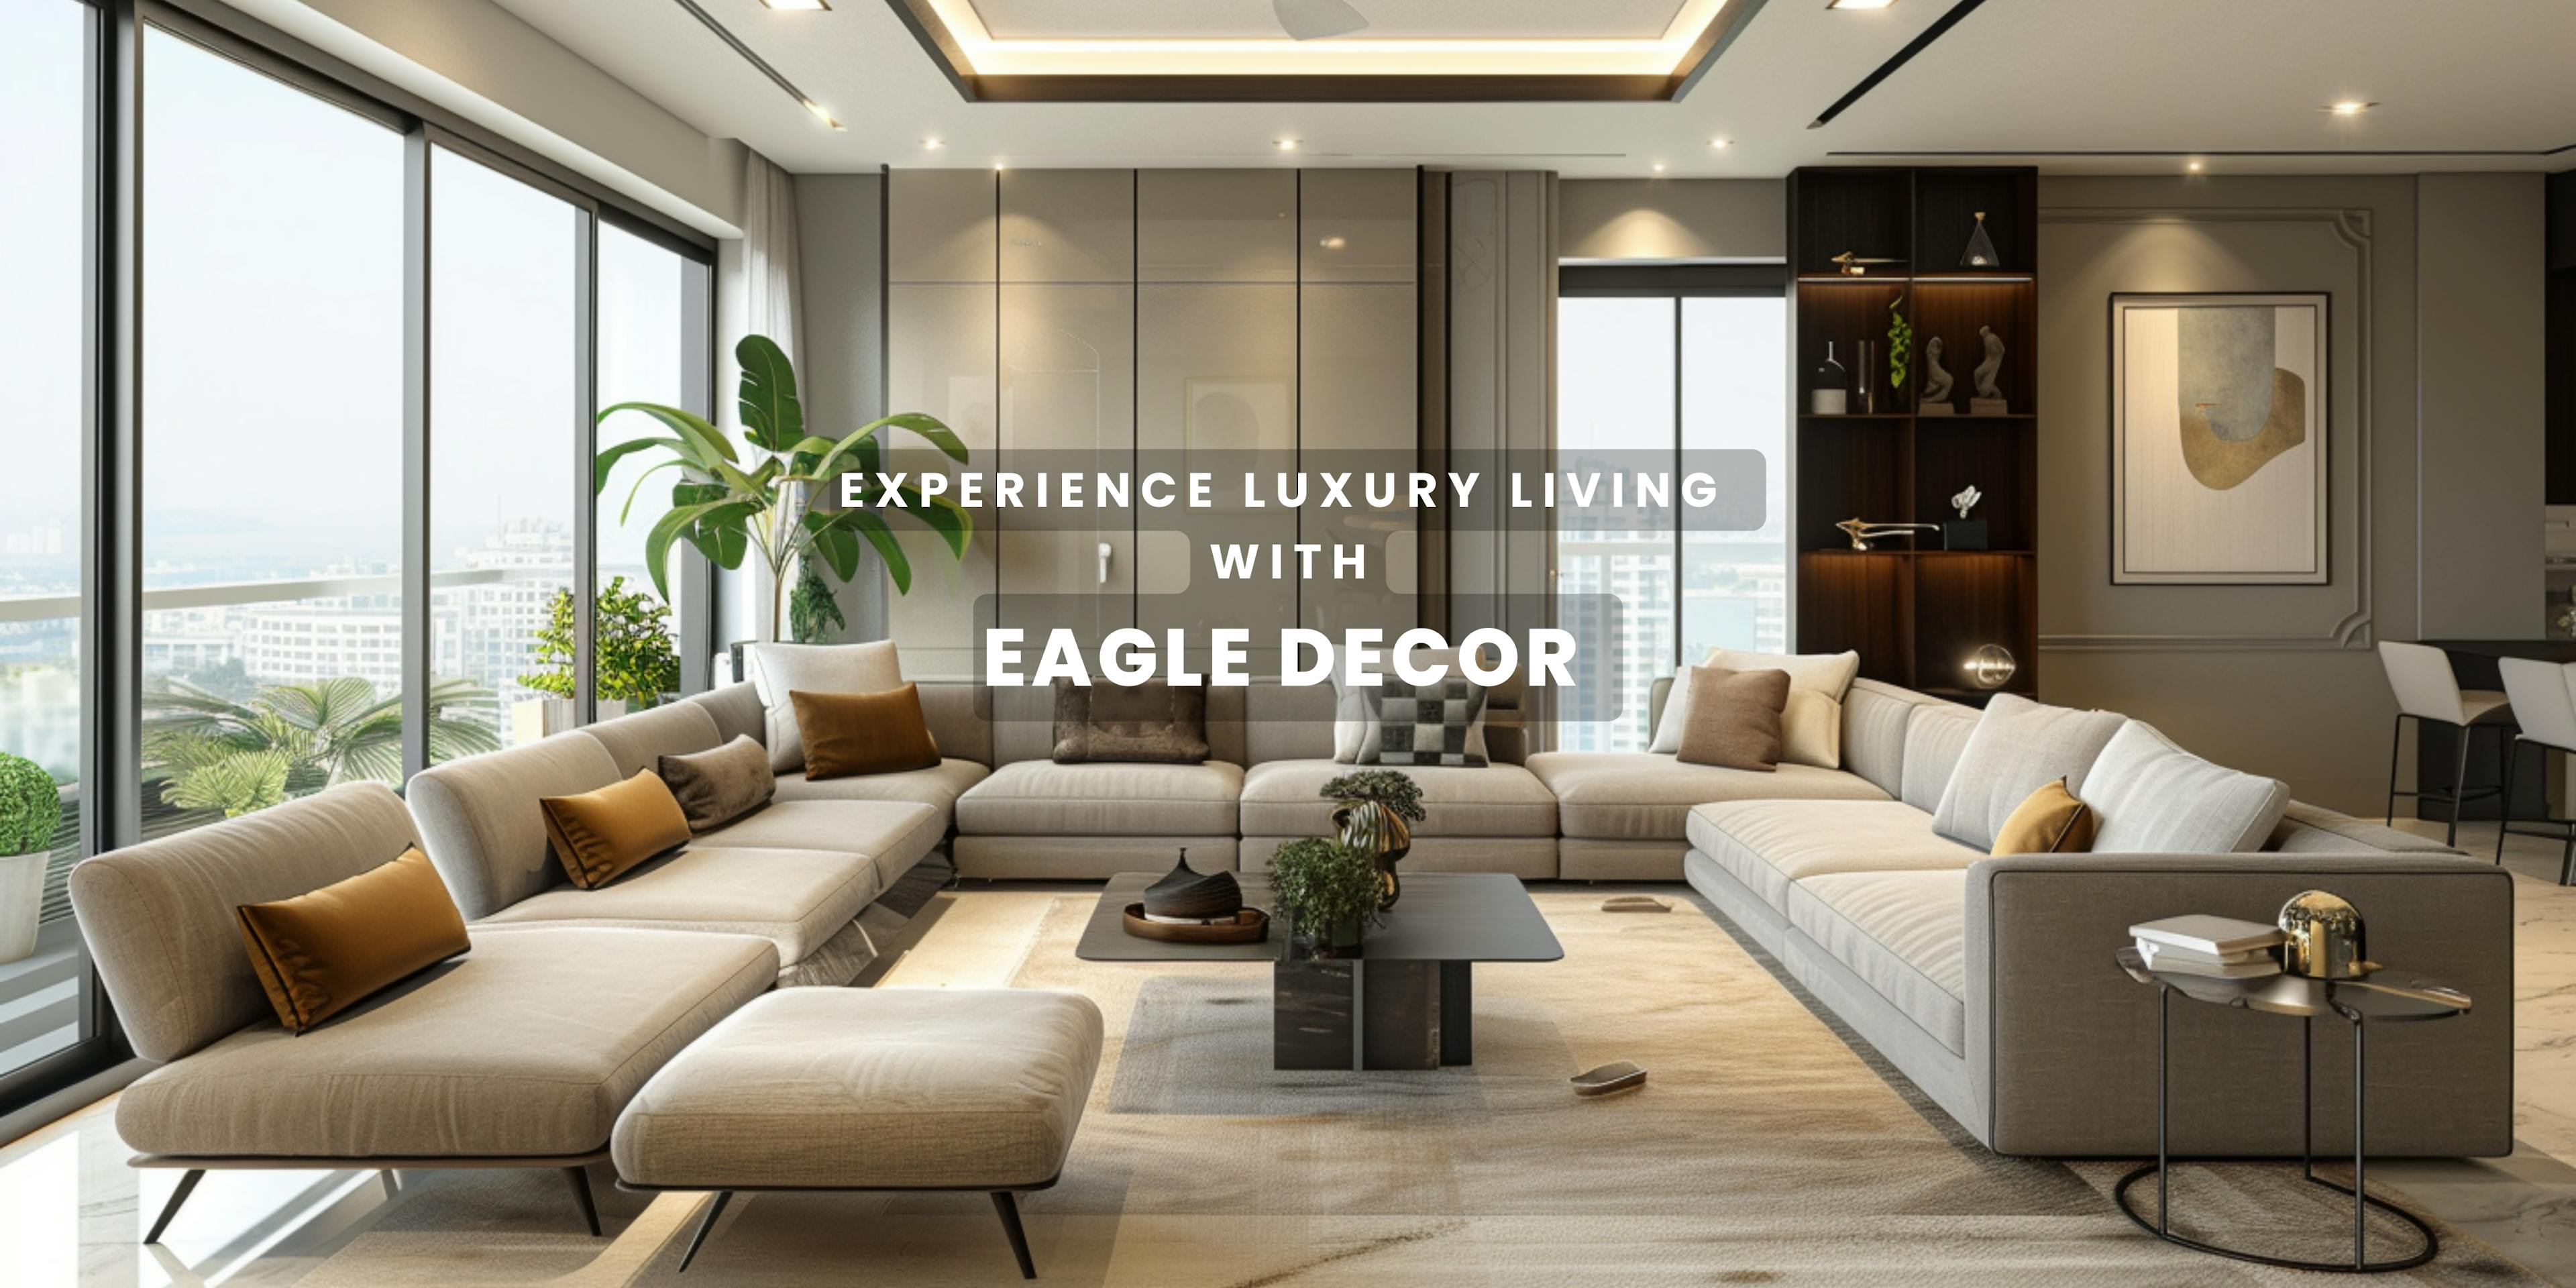 A beautiful living room designed by eagle decor in a high rise building. Gurugram